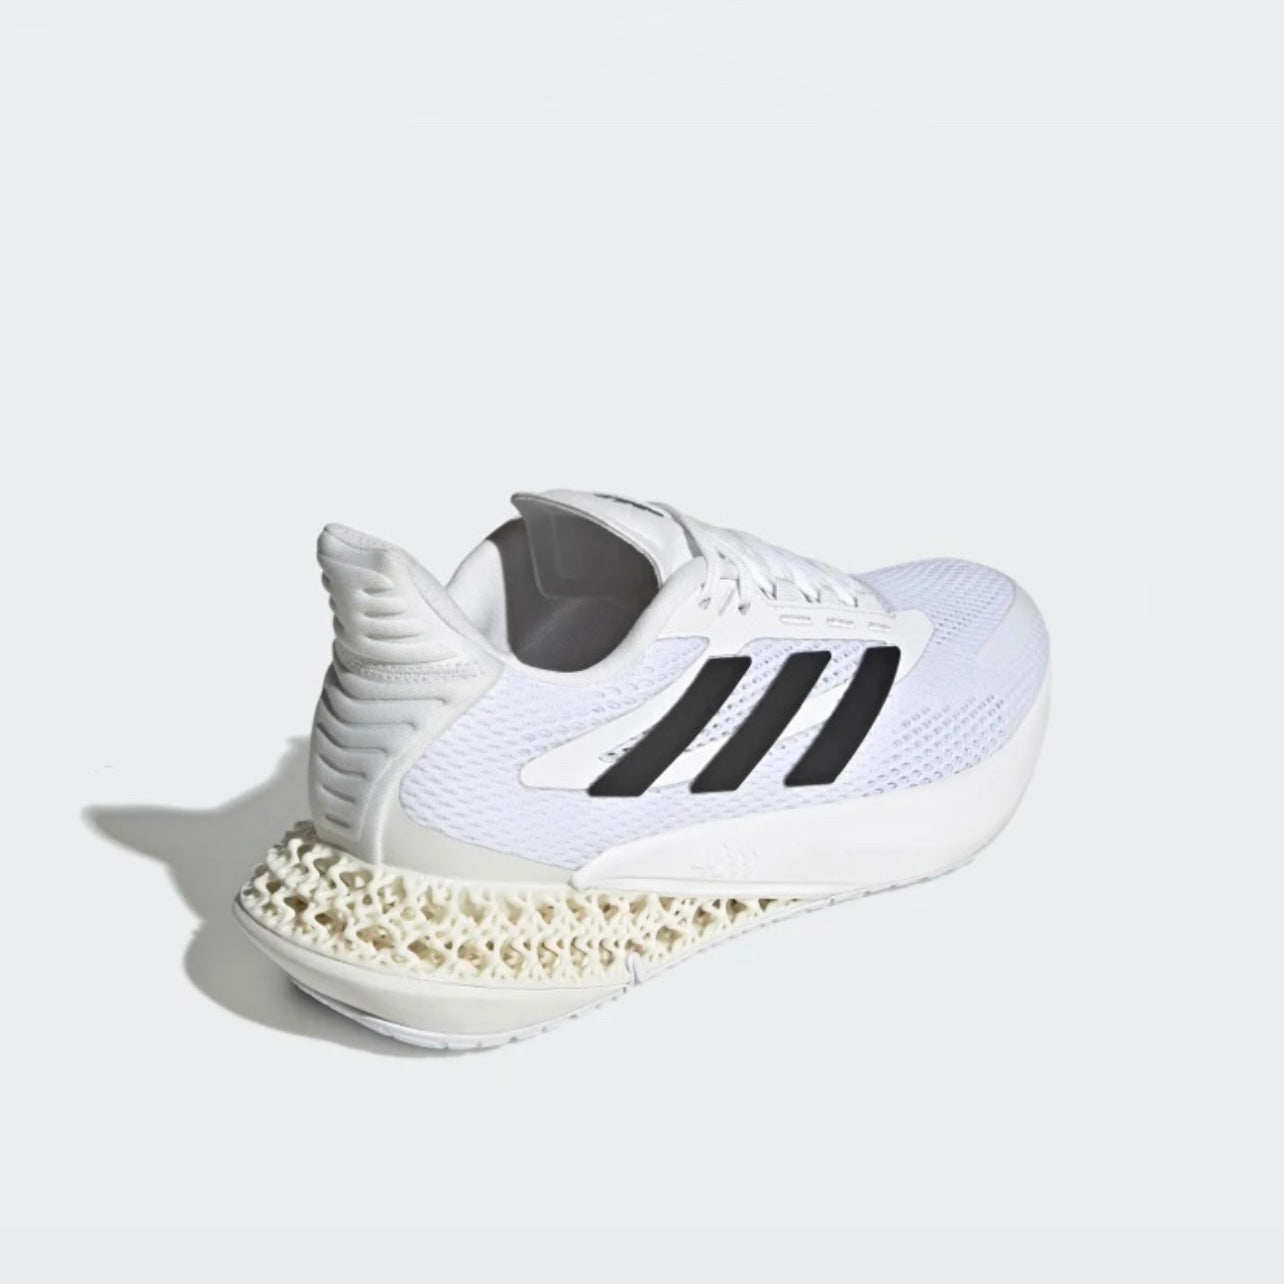 Adidas 4D sneakers for men in white